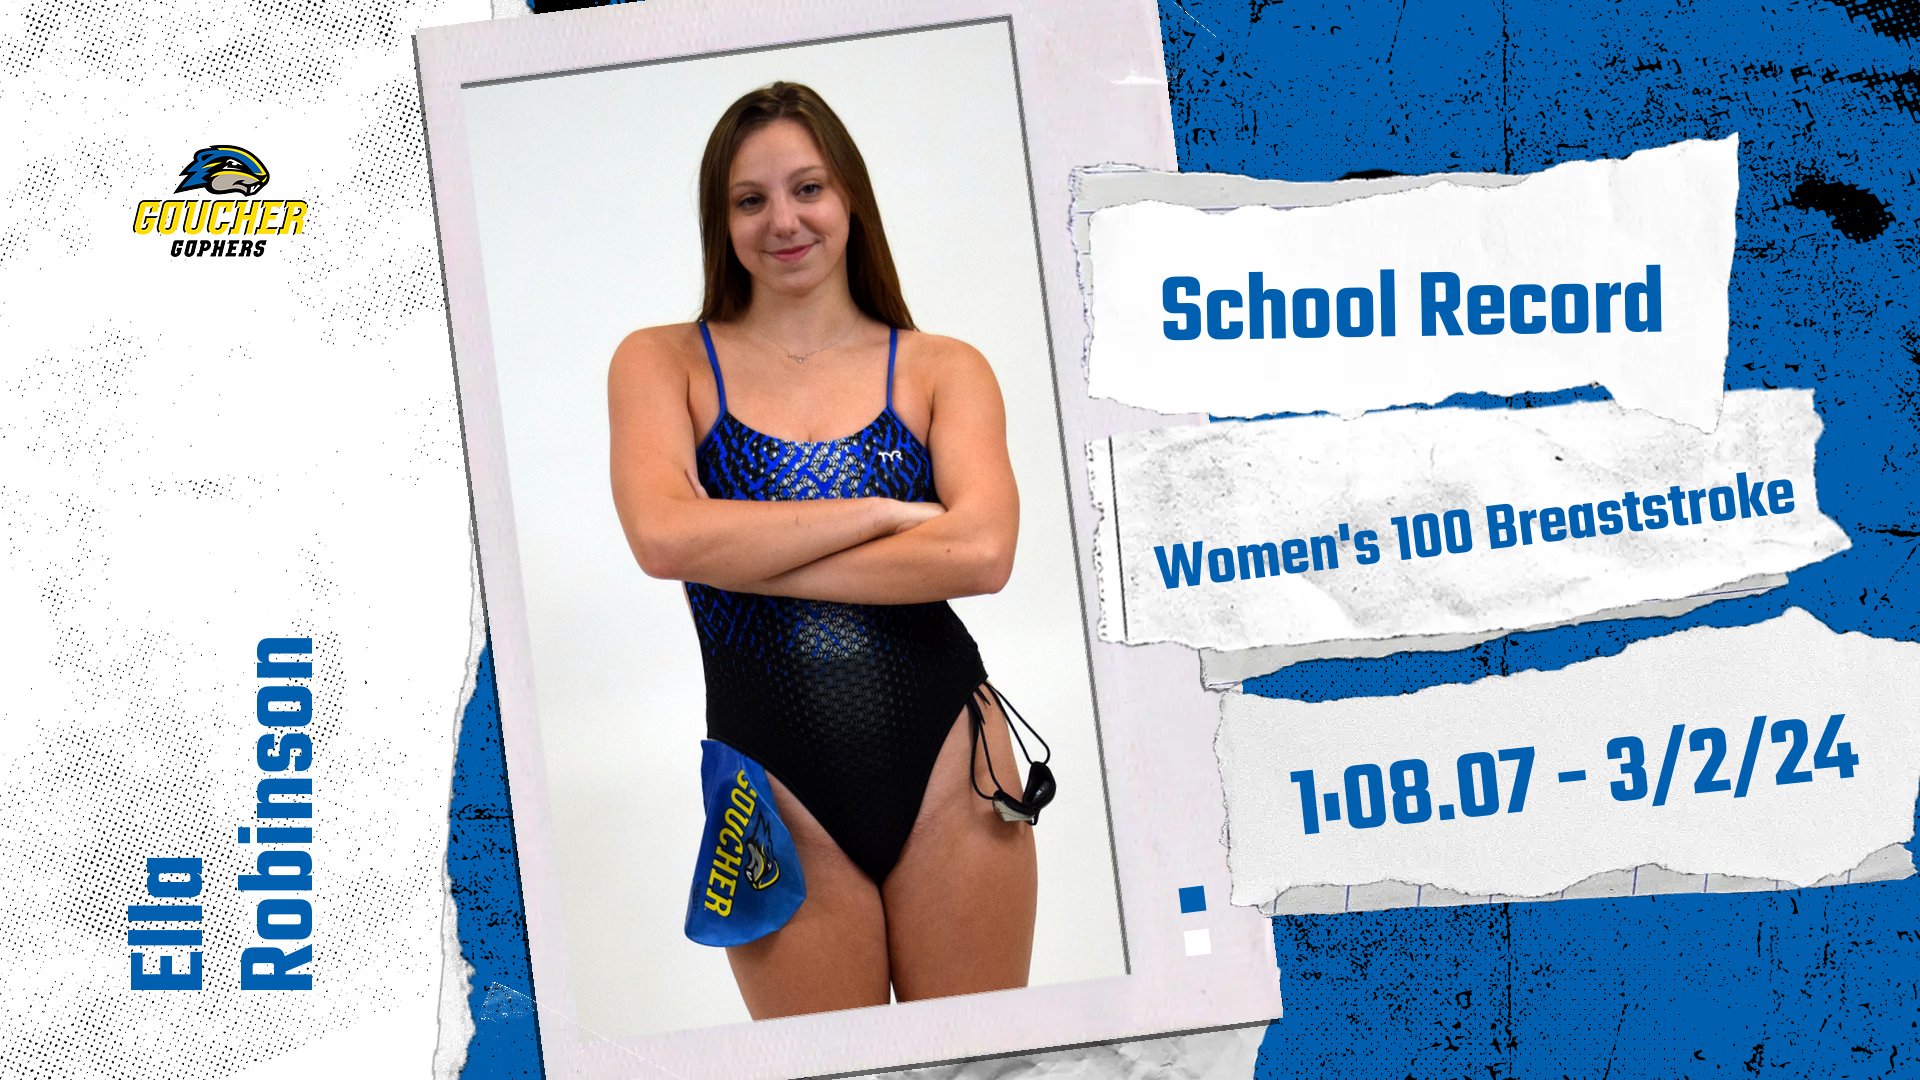 Robinson Breaks 100 Breaststroke Record...Twice, Finishes Fourth in A Final